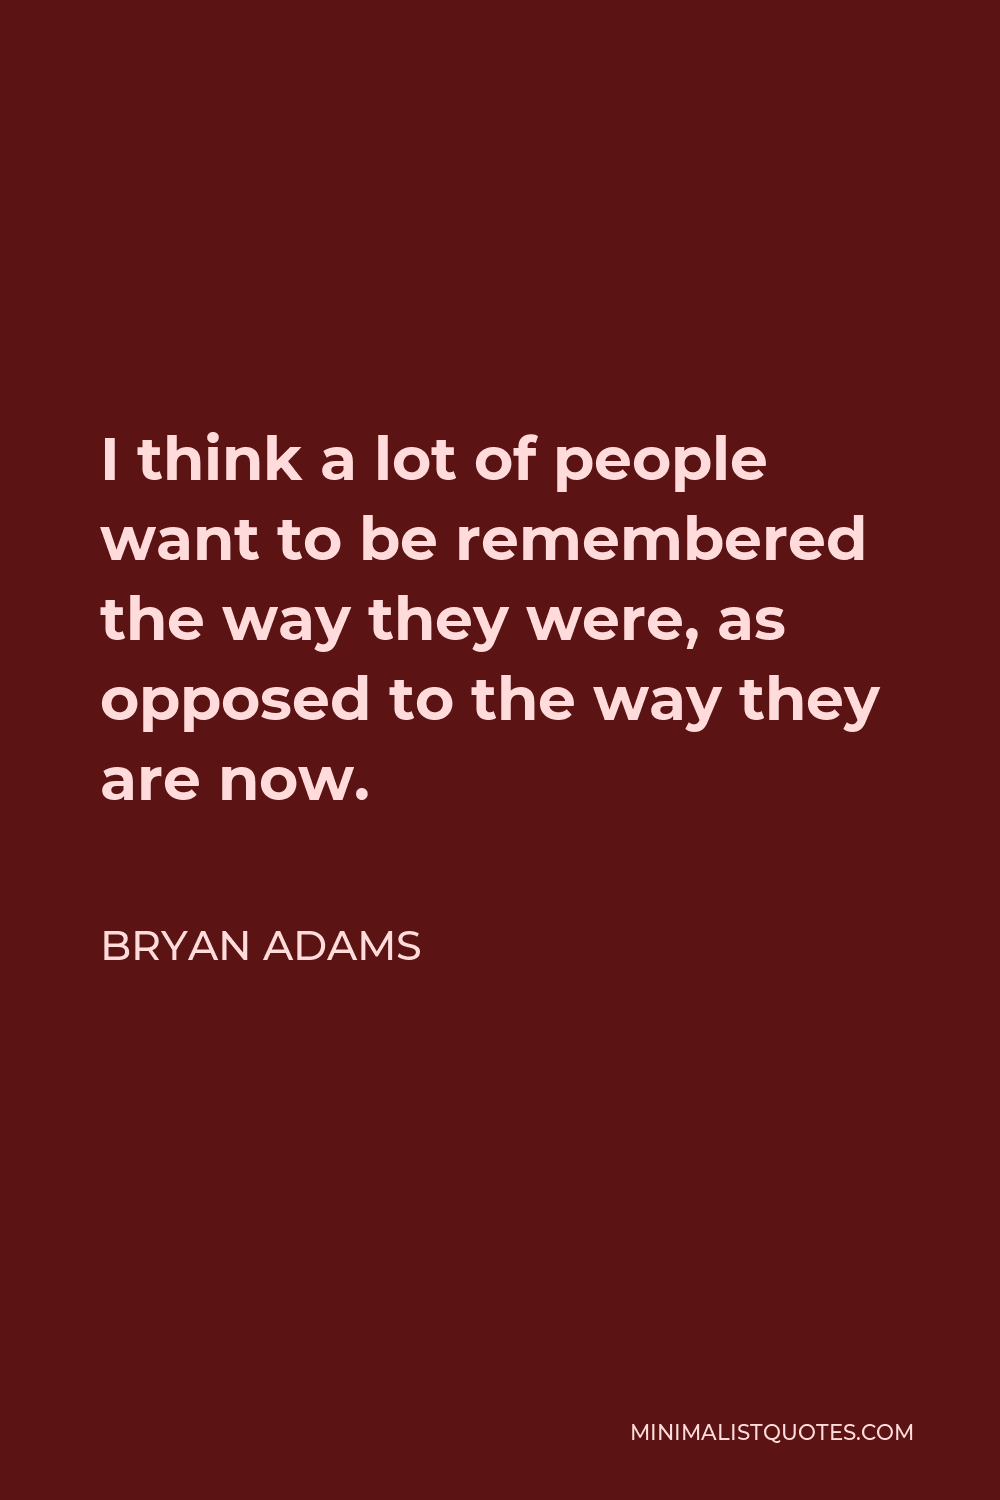 Bryan Adams Quote - I think a lot of people want to be remembered the way they were, as opposed to the way they are now.